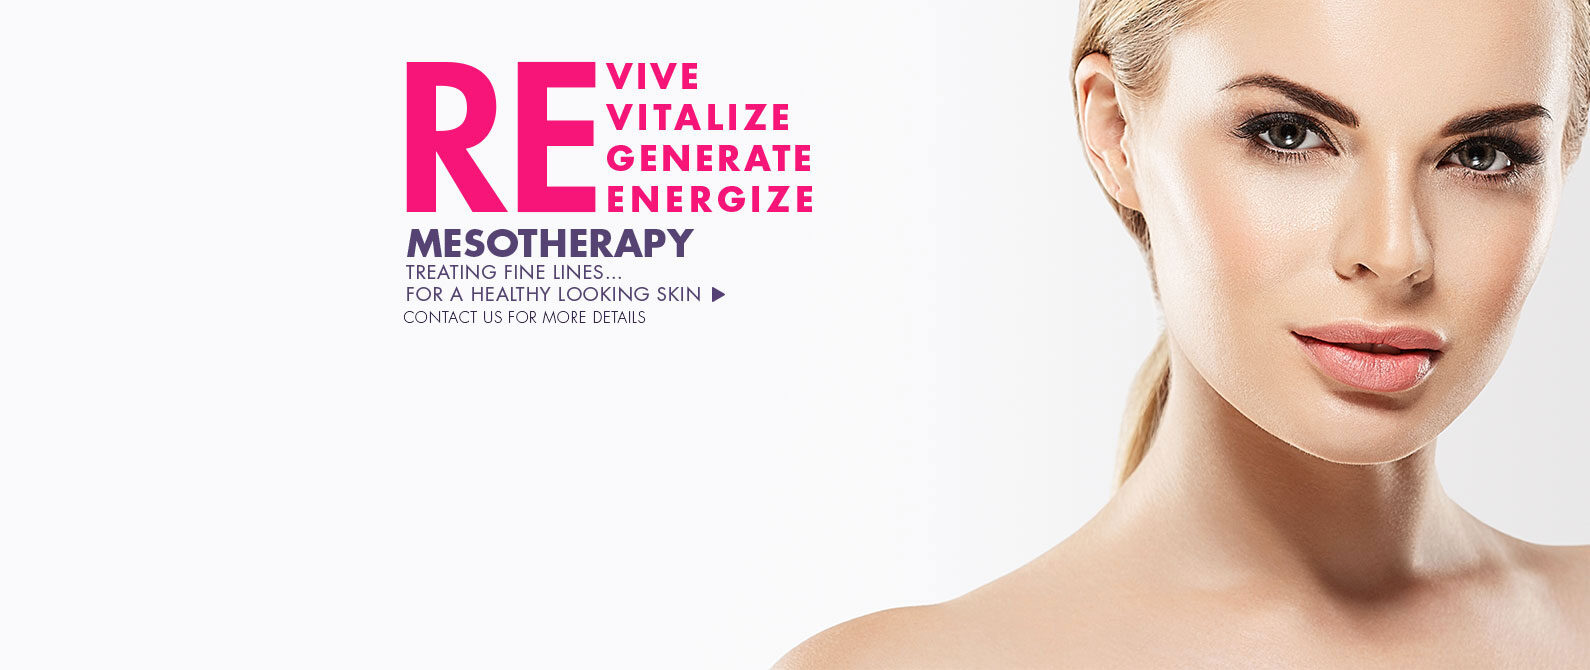 mesotherapy banner 2